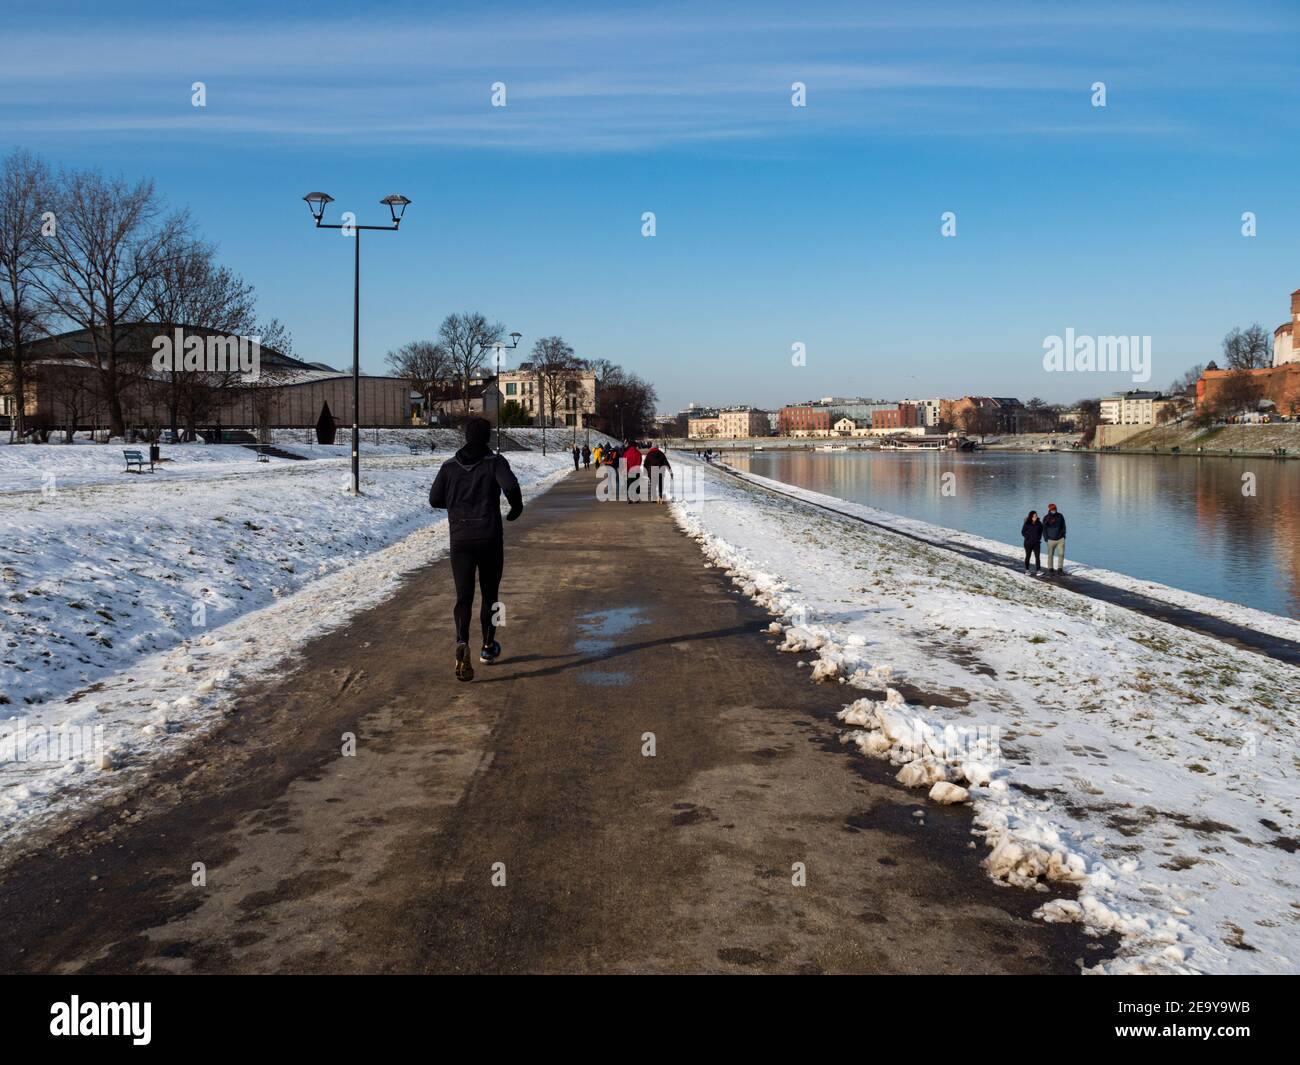 31/01/2021 - Poland Cracow. Vistula River boulevards. Winter cold day and people running or walking. Stock Photo